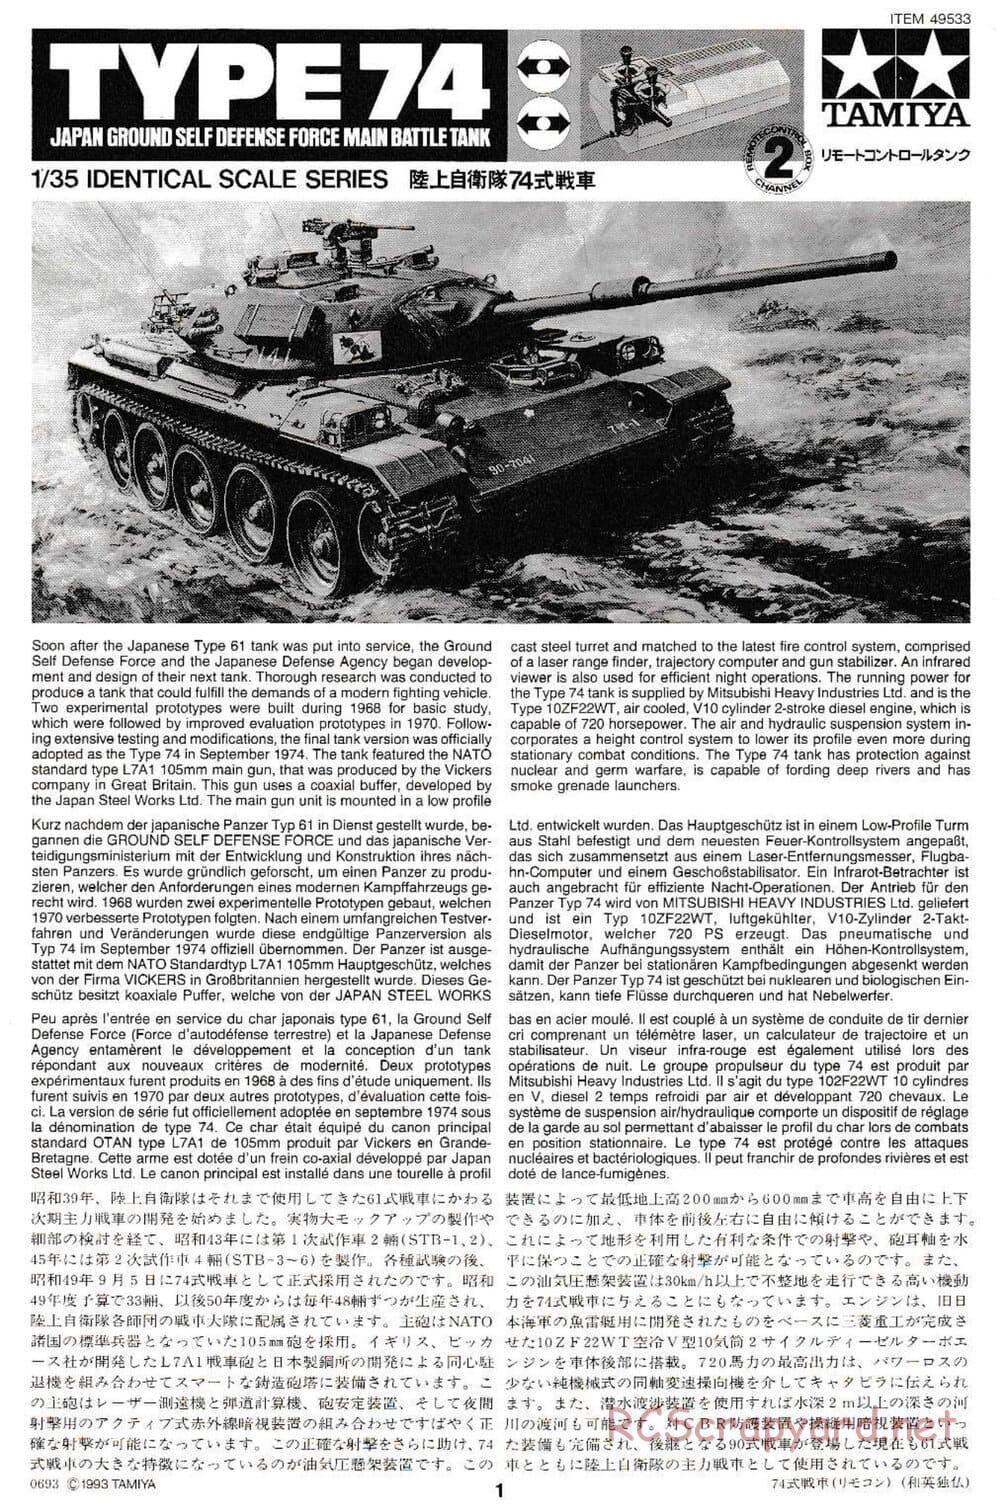 Tamiya - J.G.S.D.F. Type 74 - 1/35 Scale Chassis - Manual - Page 1